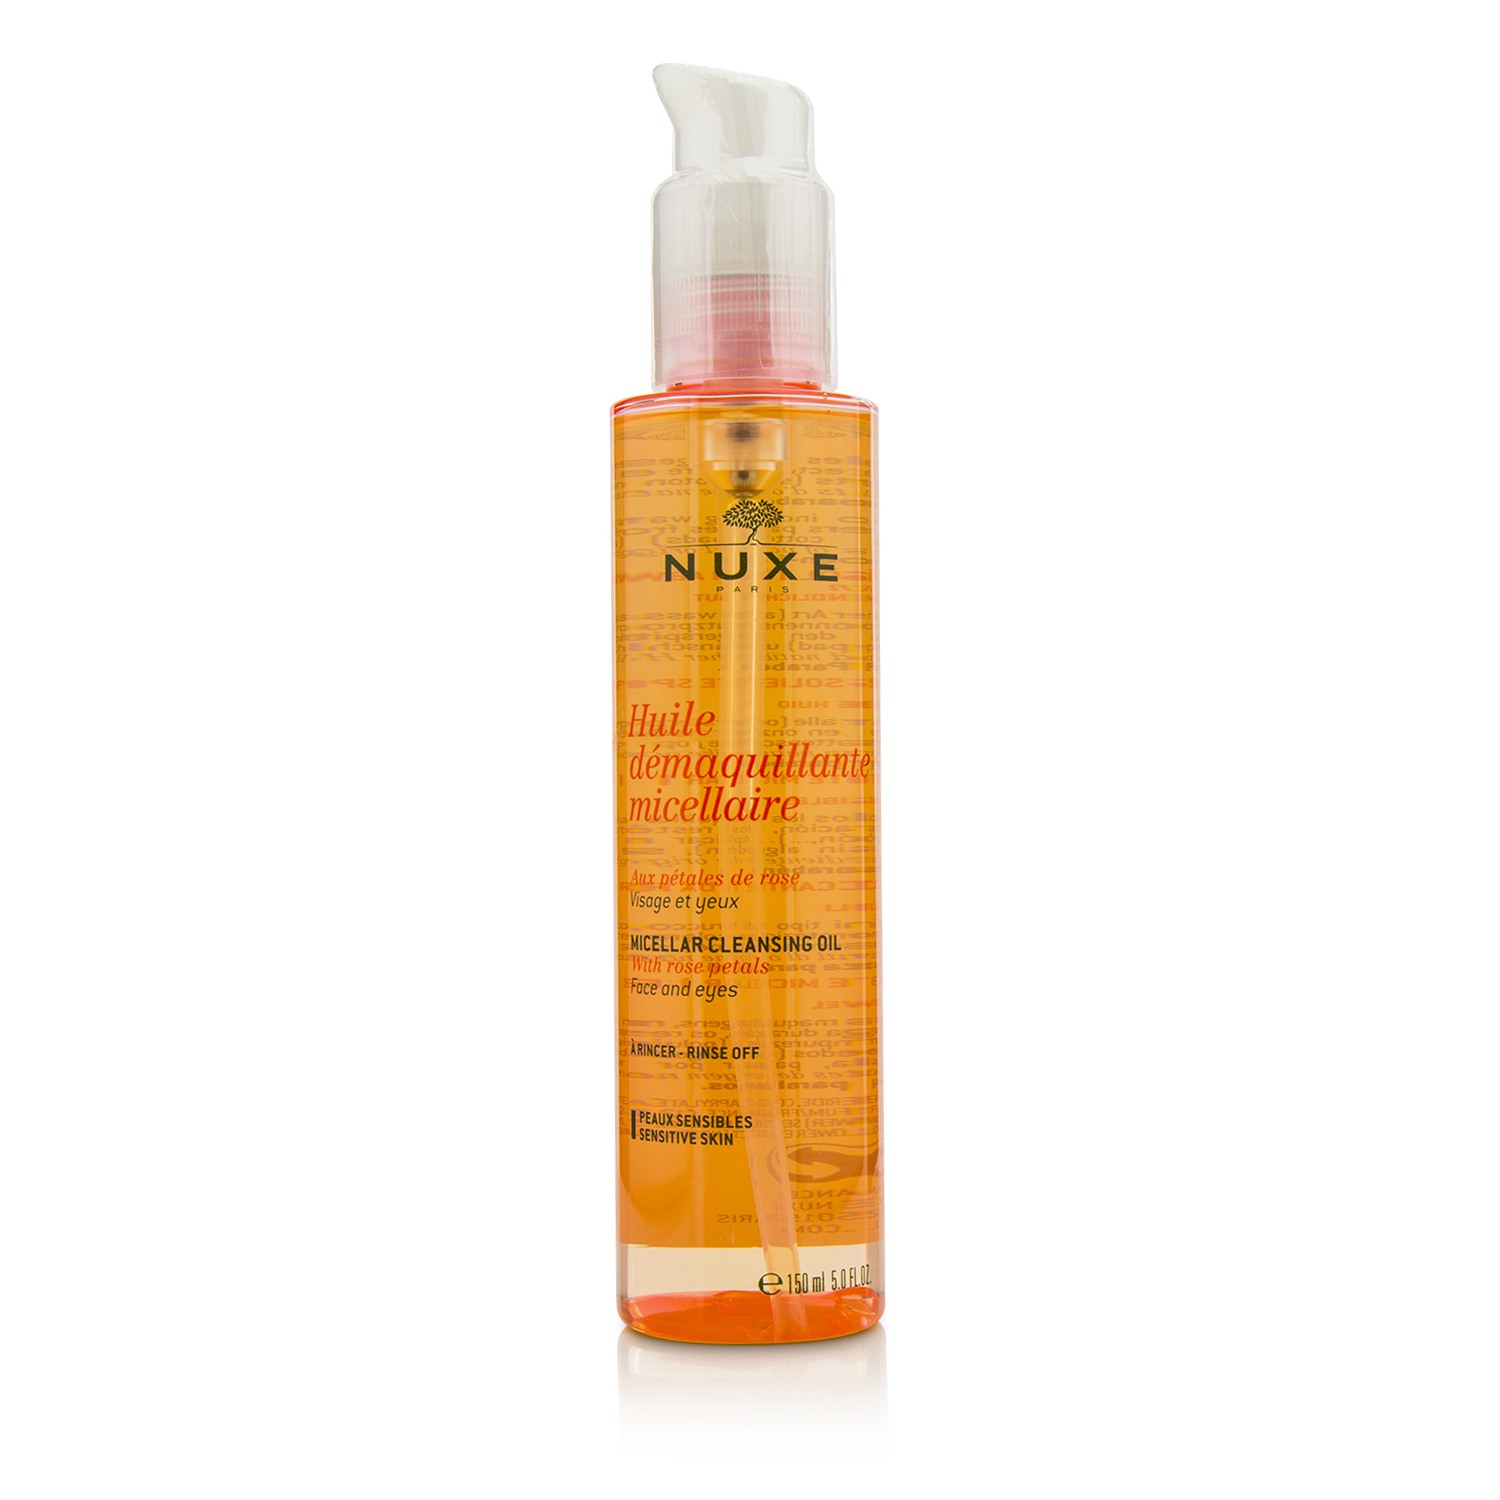 Huile Demaquillante Micellaire Micellar Cleansing Oil With Rose Petal For Face & Eyes (Sensitive Skin) Nuxe Image